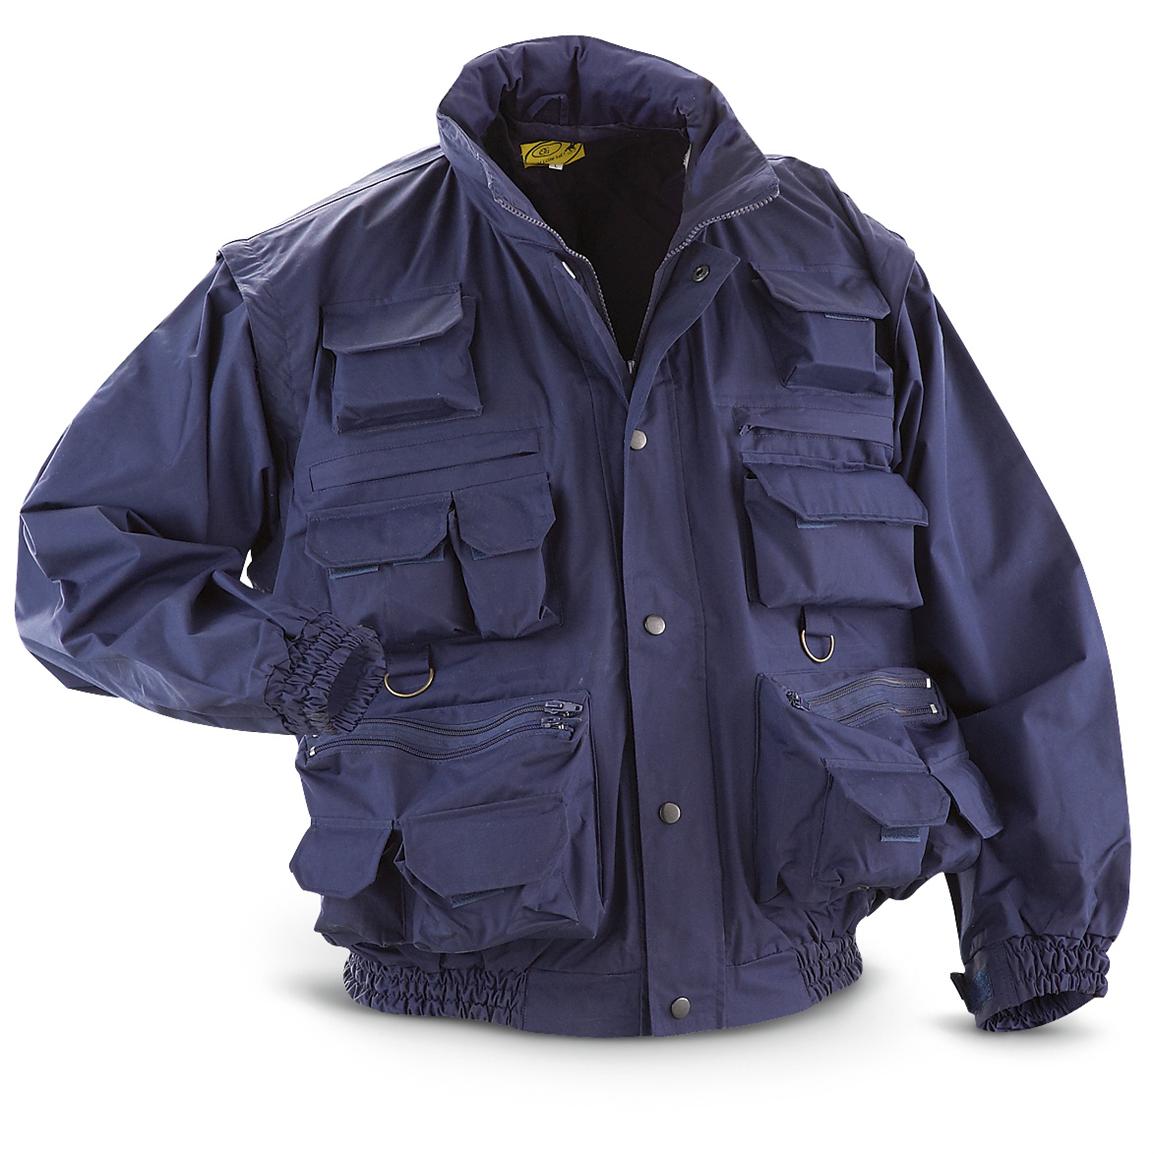 New Italian Military Surplus Style Navy Shooter's Jacket with Zip-off Sleeves, Navy - 210975 